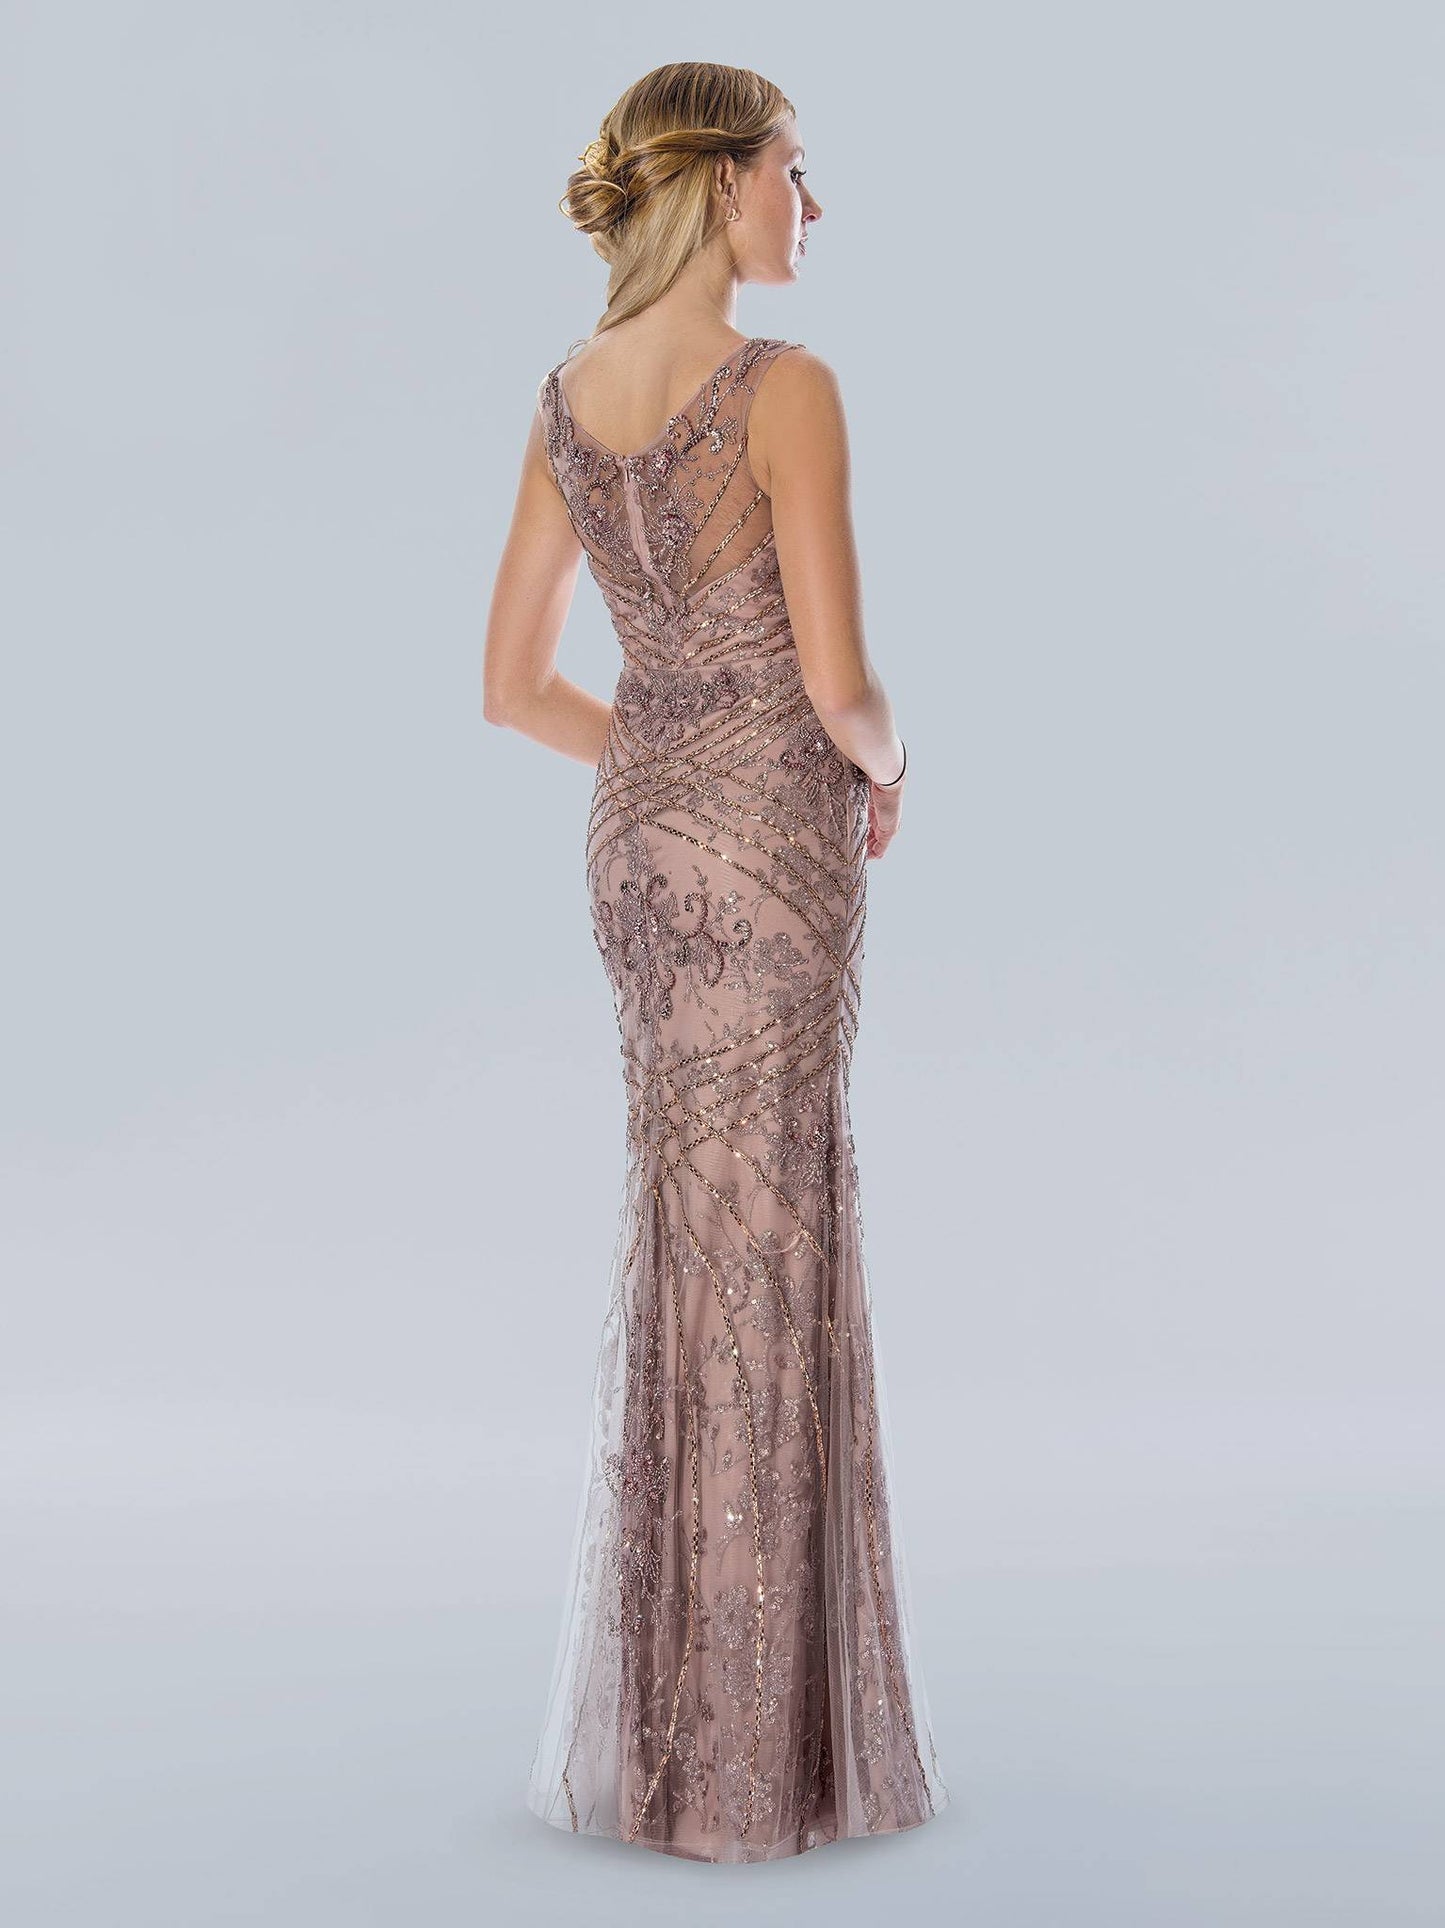 Stella Couture 21048 Long beaded Rhinestone embellished formal dress prom pageant. Stella Couture's 21048 Long Shimmer Beaded Evening Dress is the perfect choice for formal occasions. Crafted with intricate beadwork detail, this figure-flattering gown features a full length design with a classic scoop neckline and tulle-lined skirt for added movement. A breathtaking choice for these special occasions.